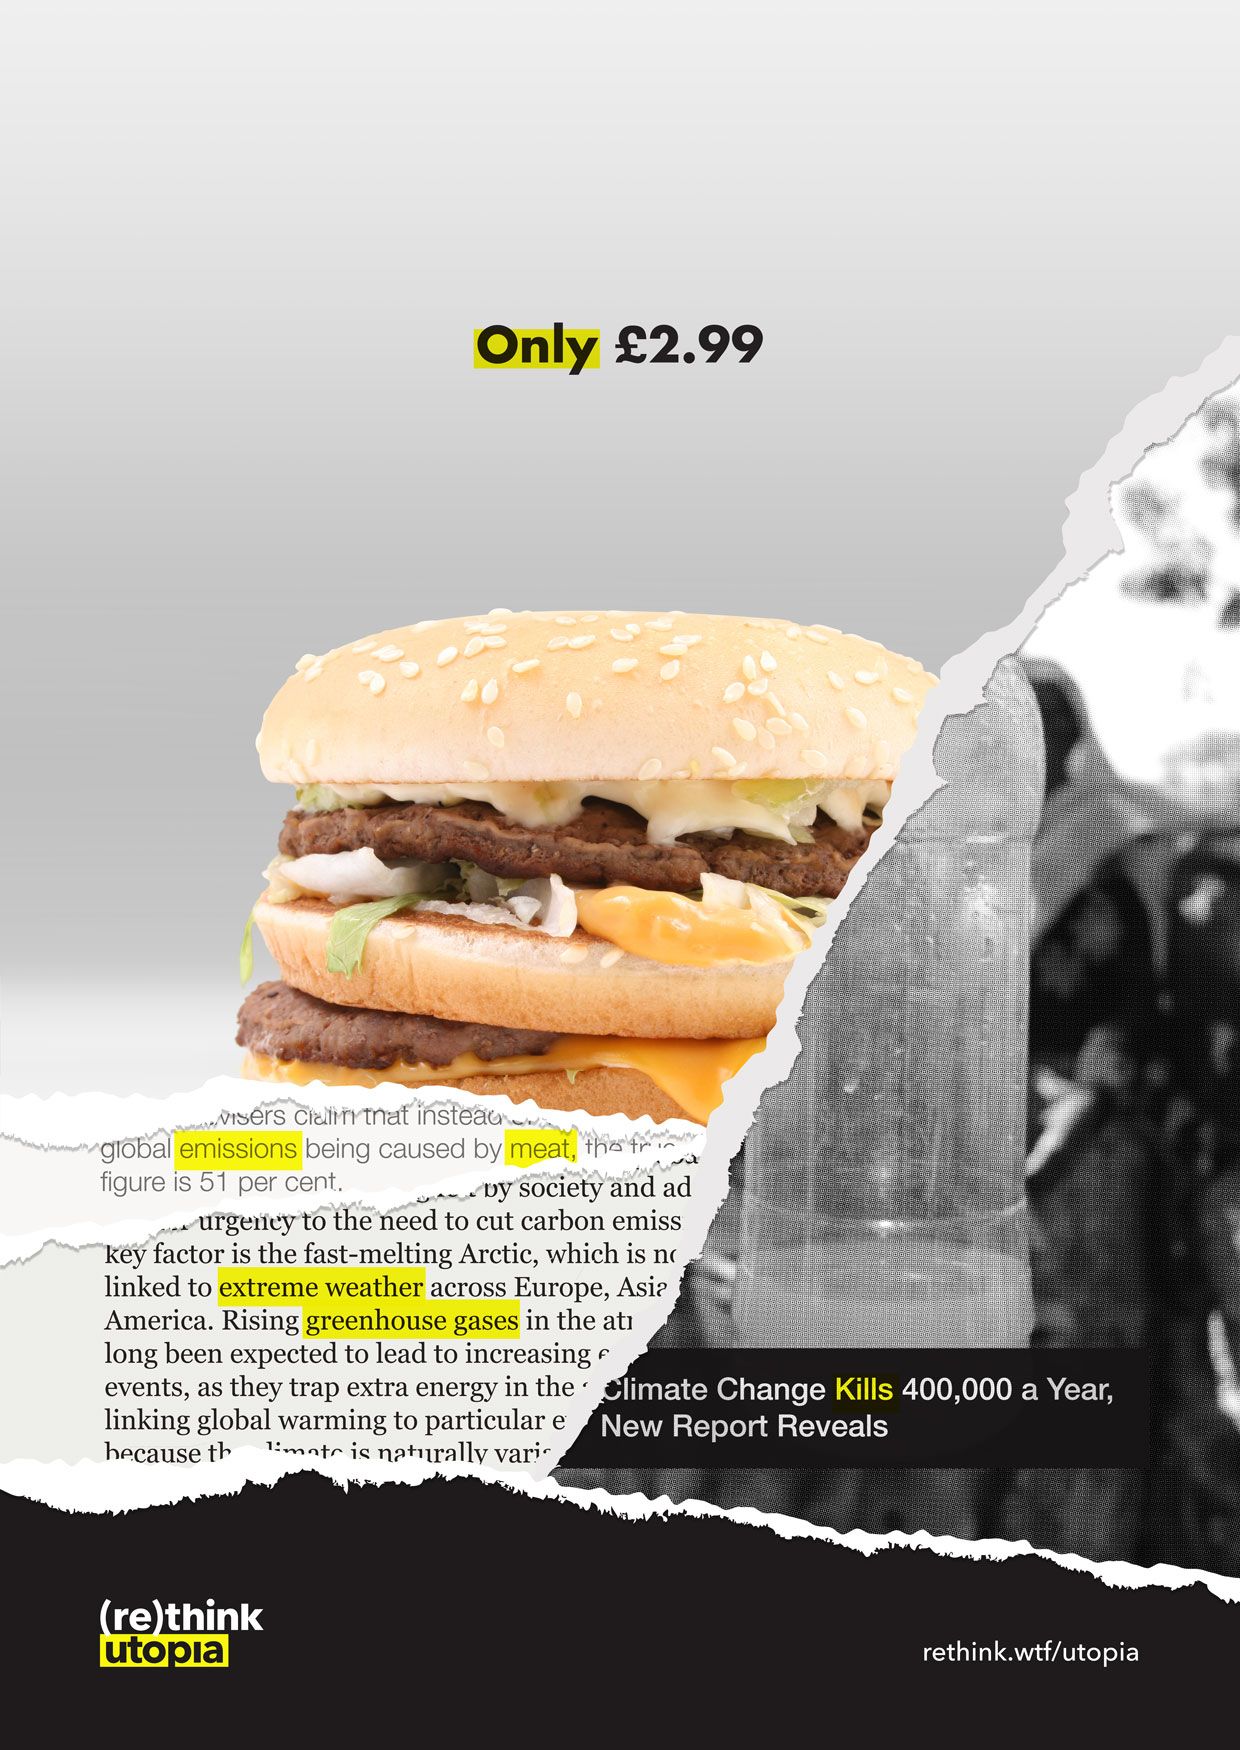 Cheap burger ad, torn to reveal layers of information about true cost.